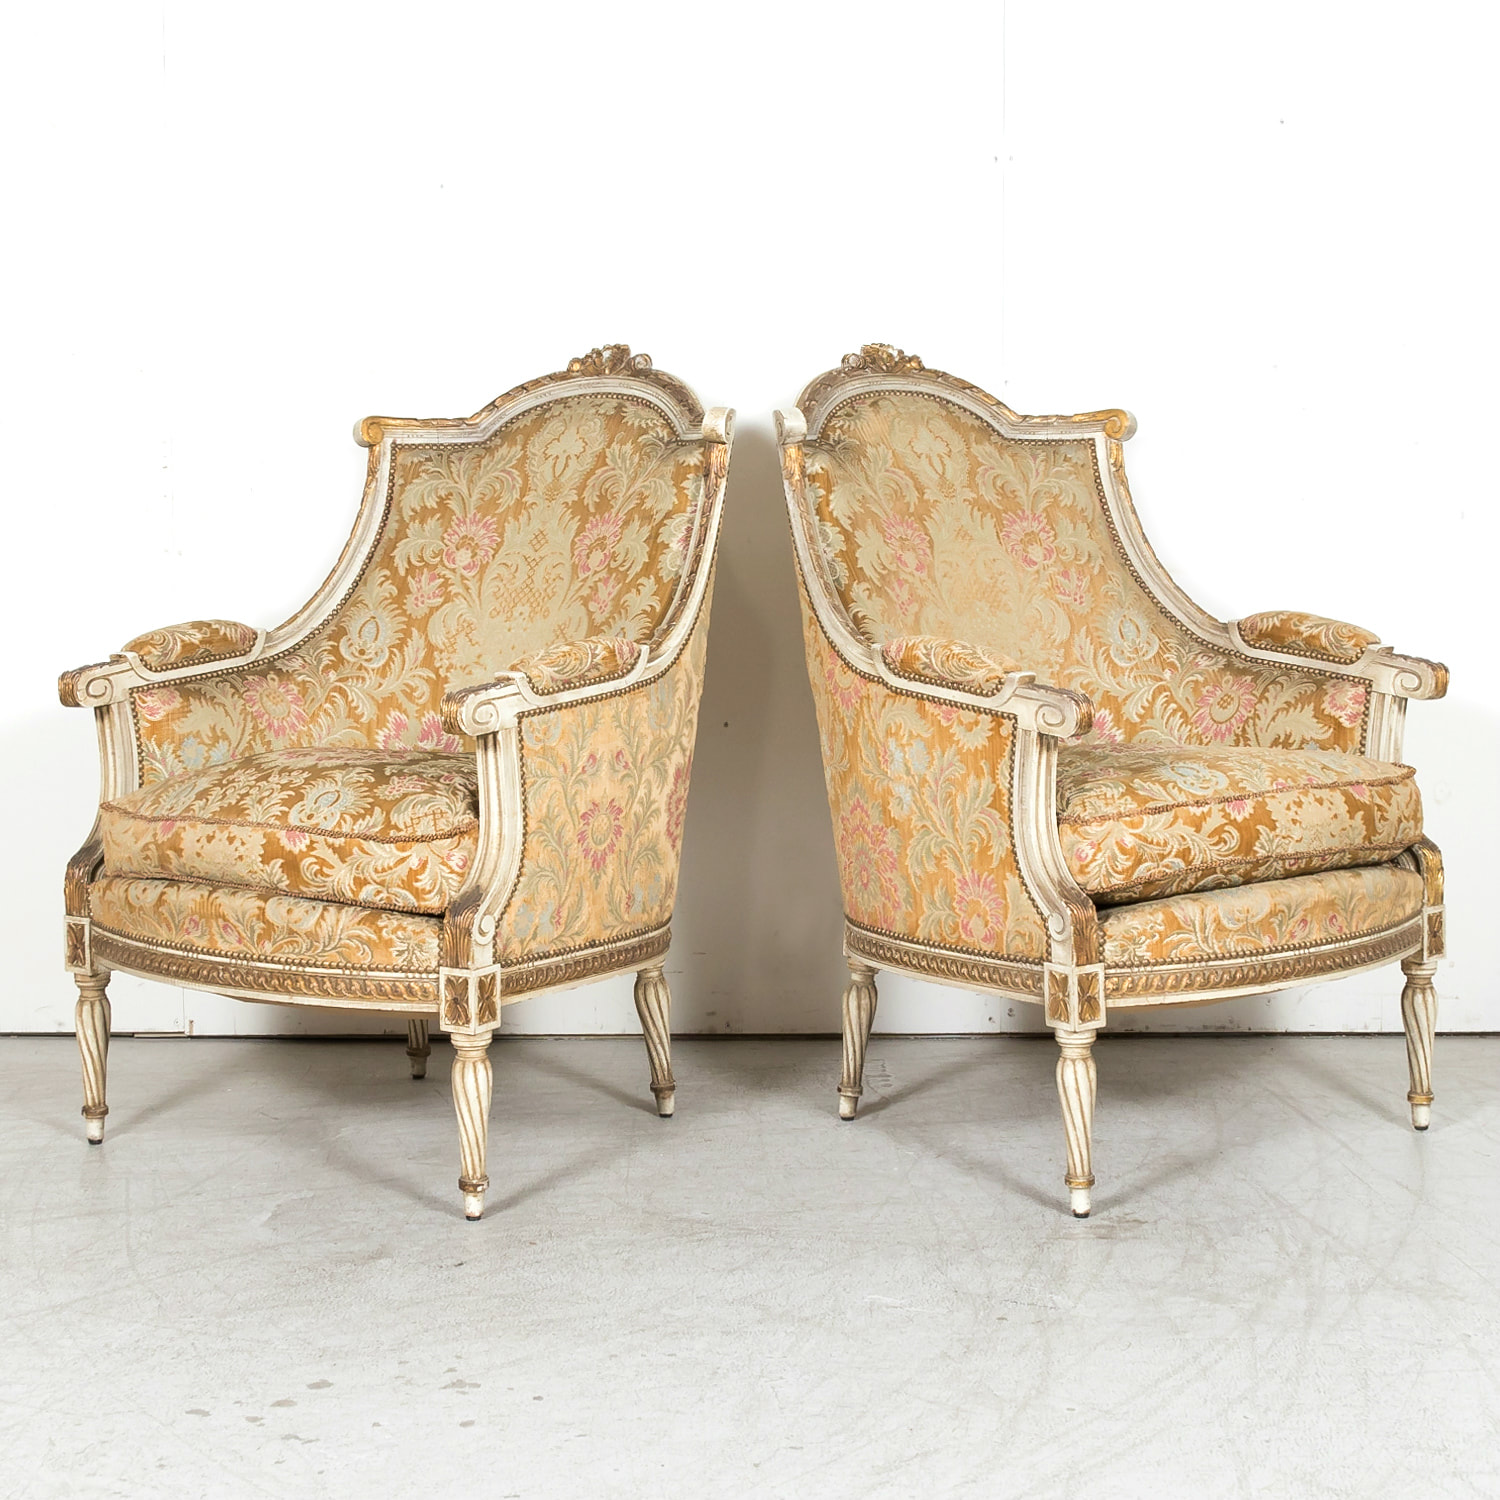 Vintage French Louis XVI Style Bergere Chairs in Pink Damask and